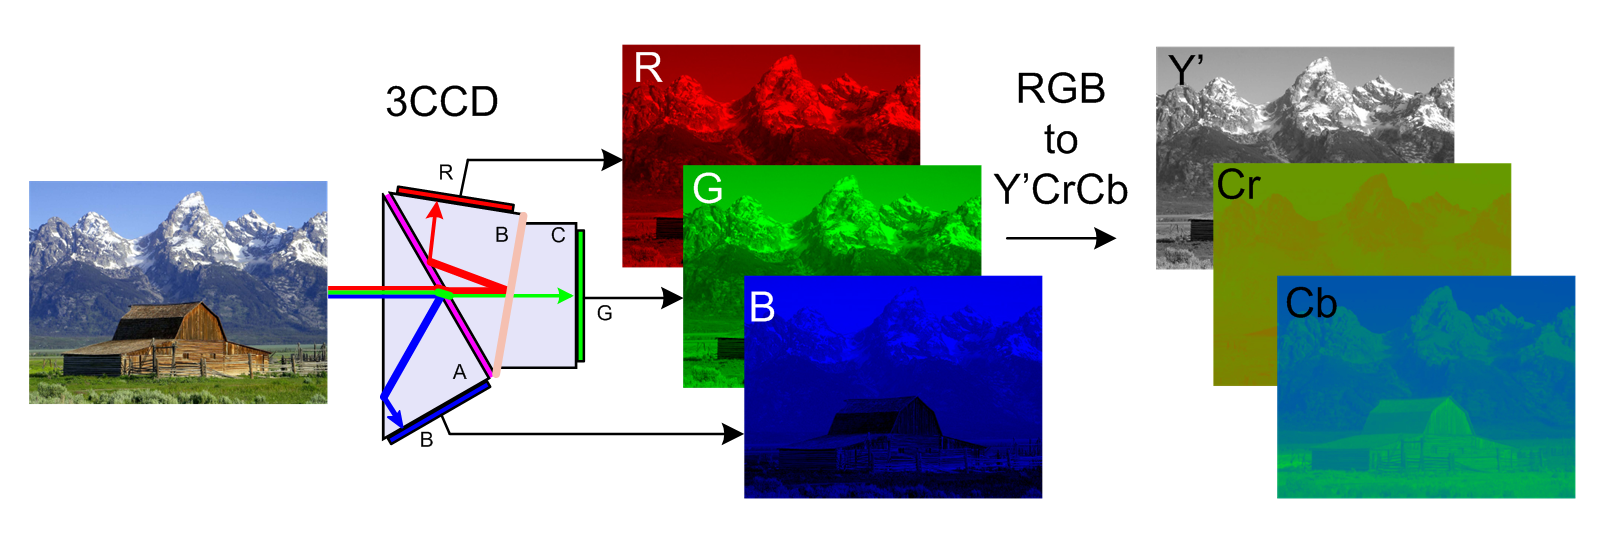 In still image we speak about RGB, while for video, we refer to Y'CbCr - Did you know: 4K vs 1080p, chroma sub-sampling and why you should record in 4K even if your TV does not support it yet